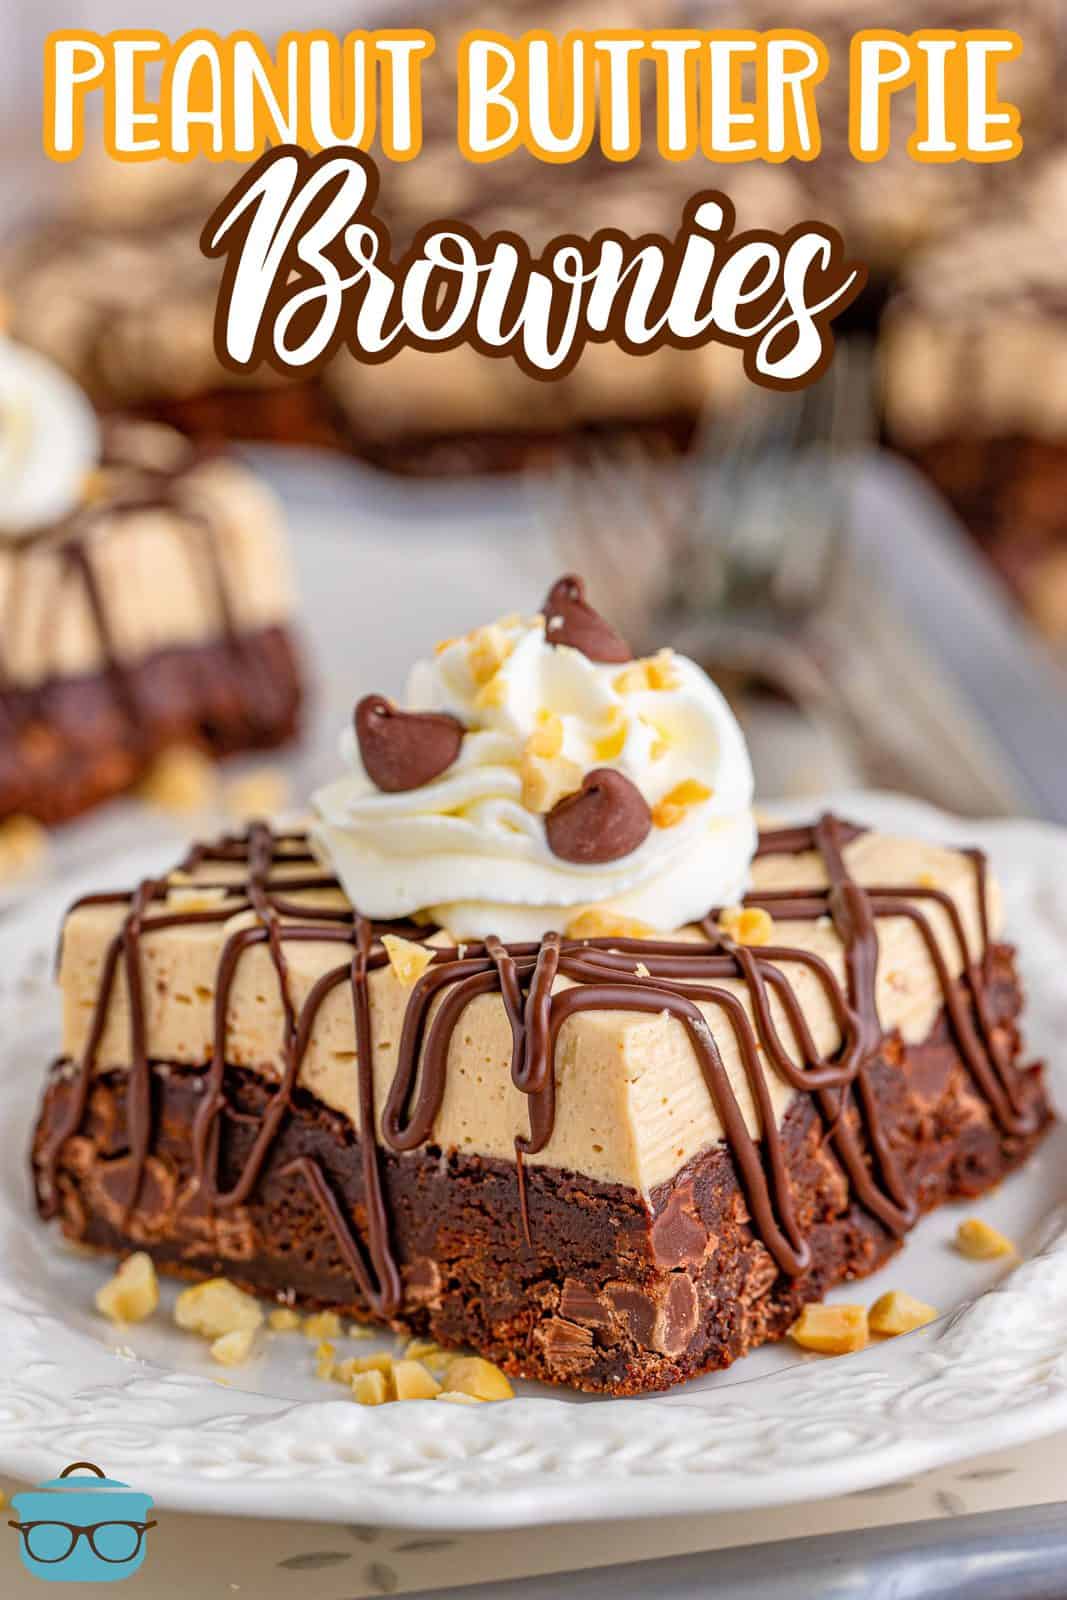 Pinterest image of one Peanut Butter Pie Brownie on plate garnished.